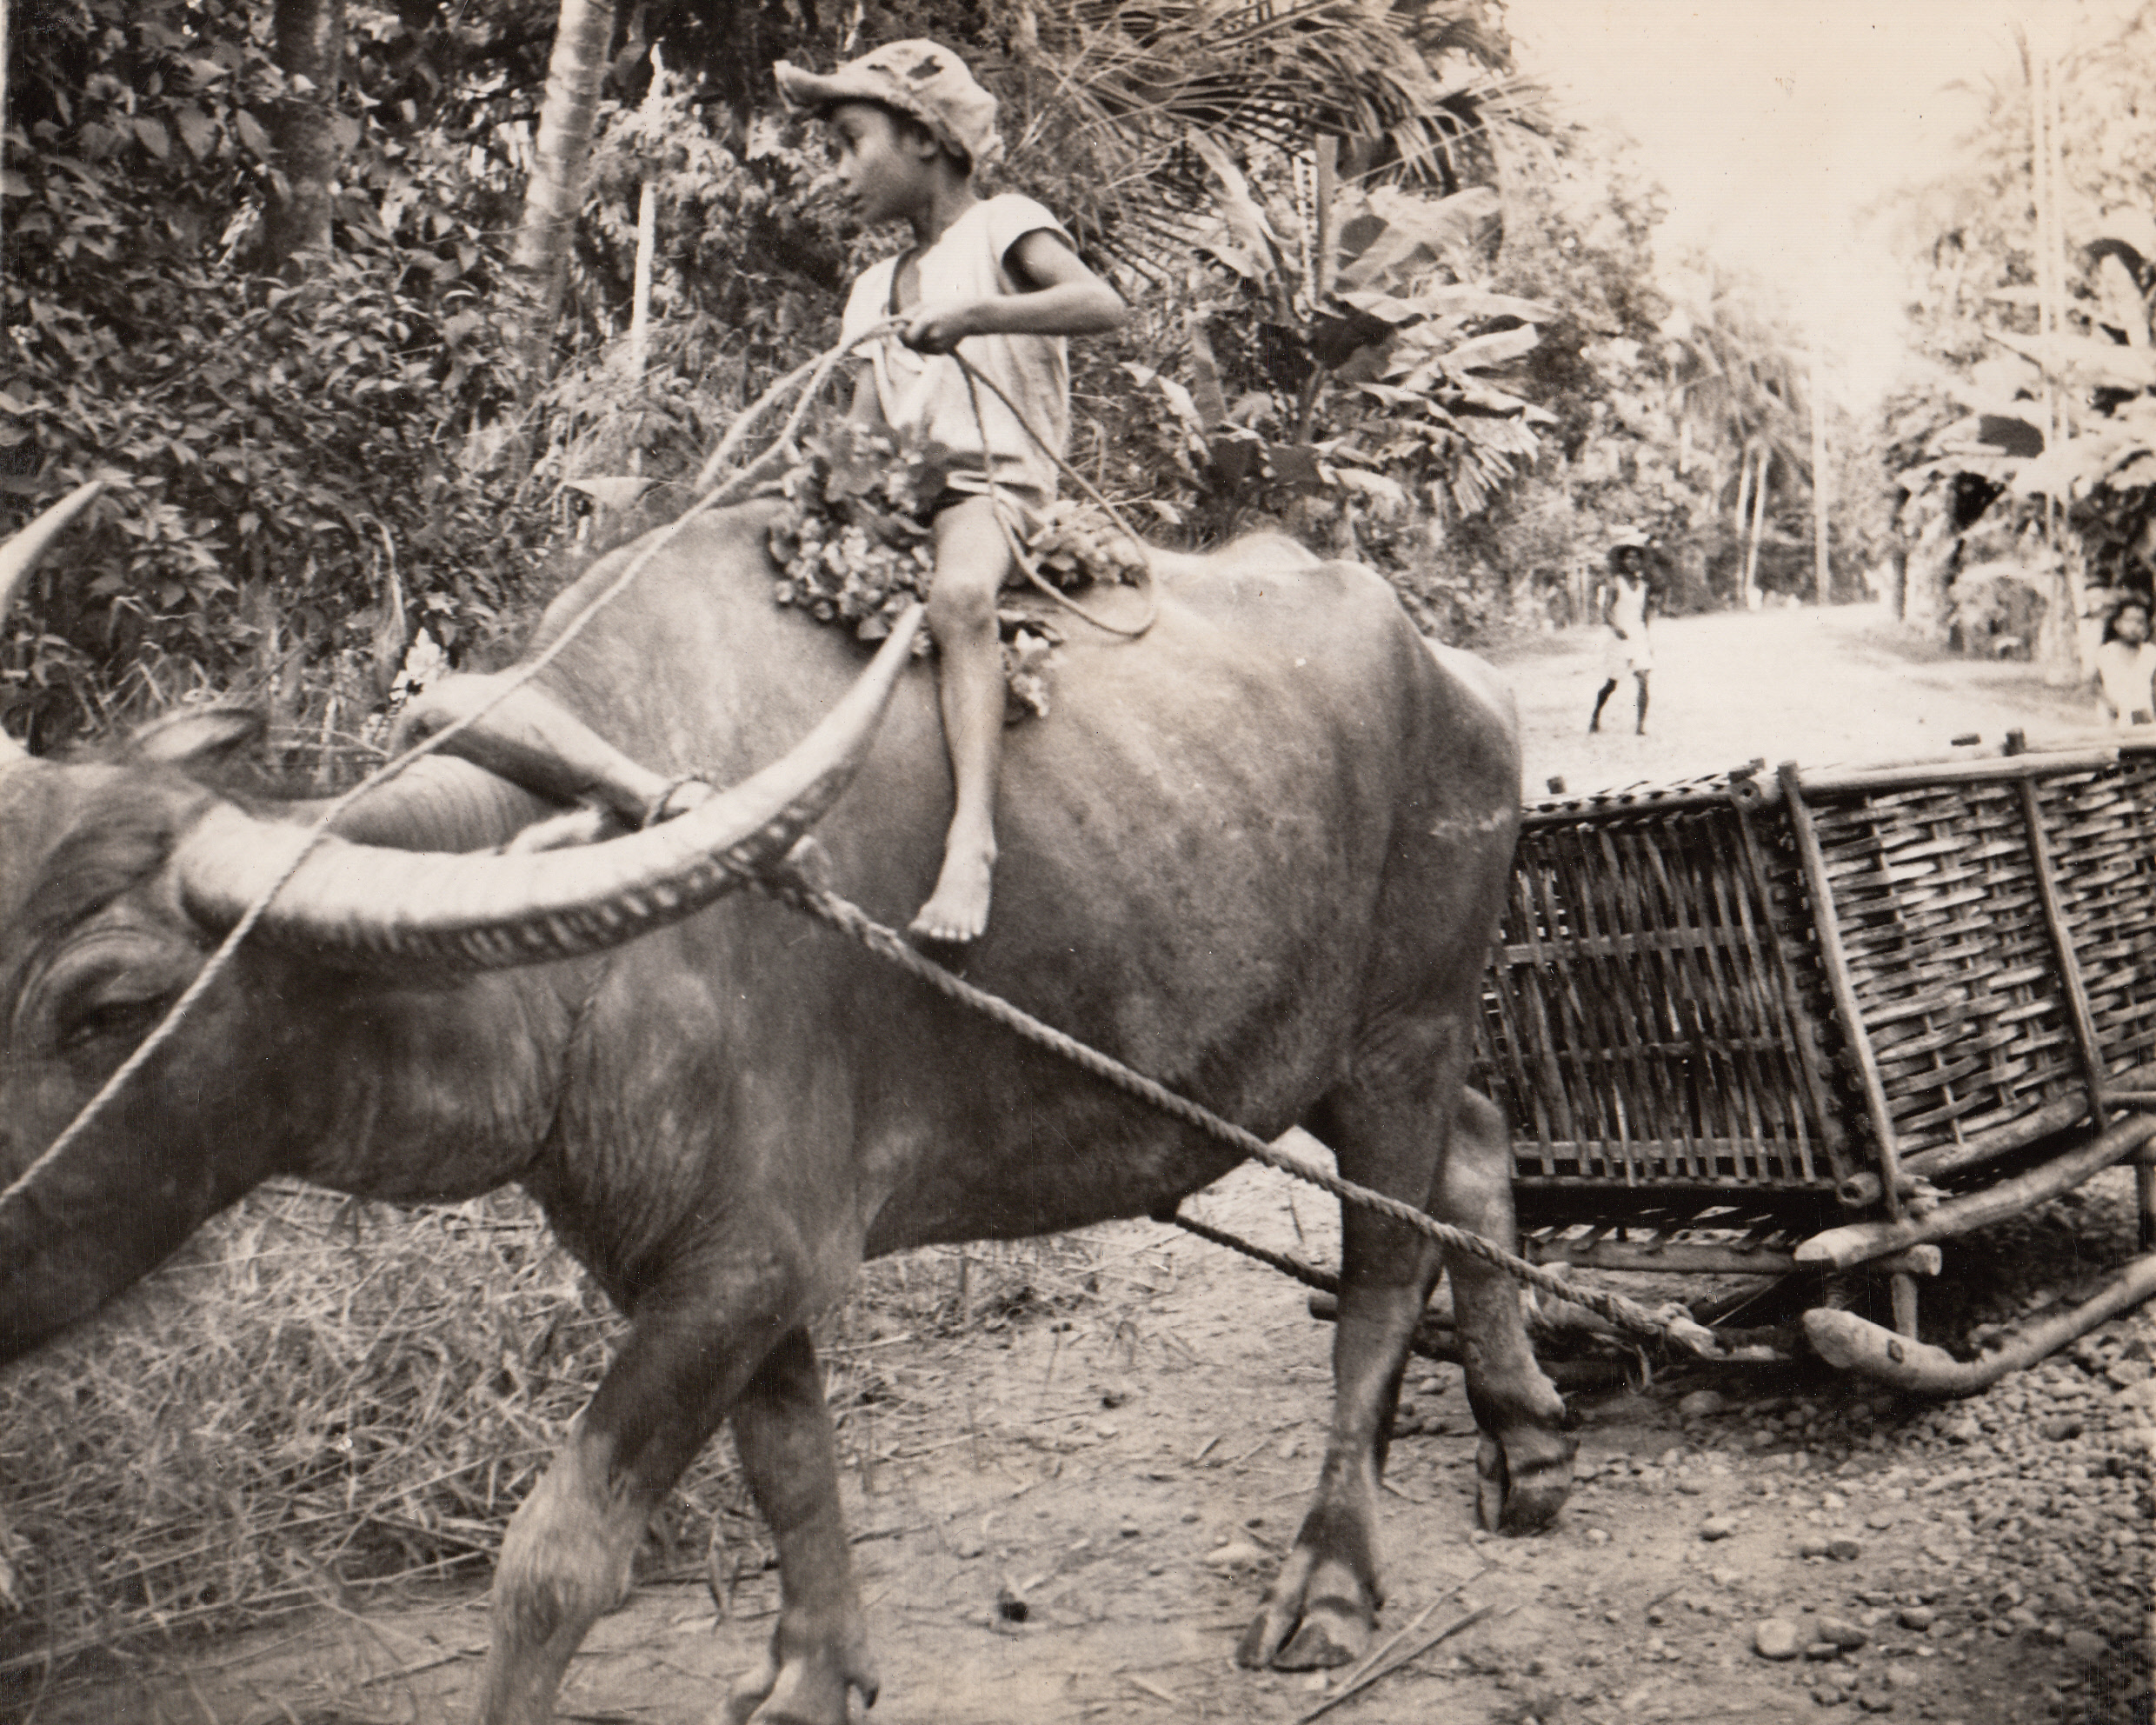 Travels in Style, 1/23/1945. Luzon – Filipino lad sits astride a caribou, domesticated animal used on Luzon and all the Philippine Islands for transportation and hauling purposes.;